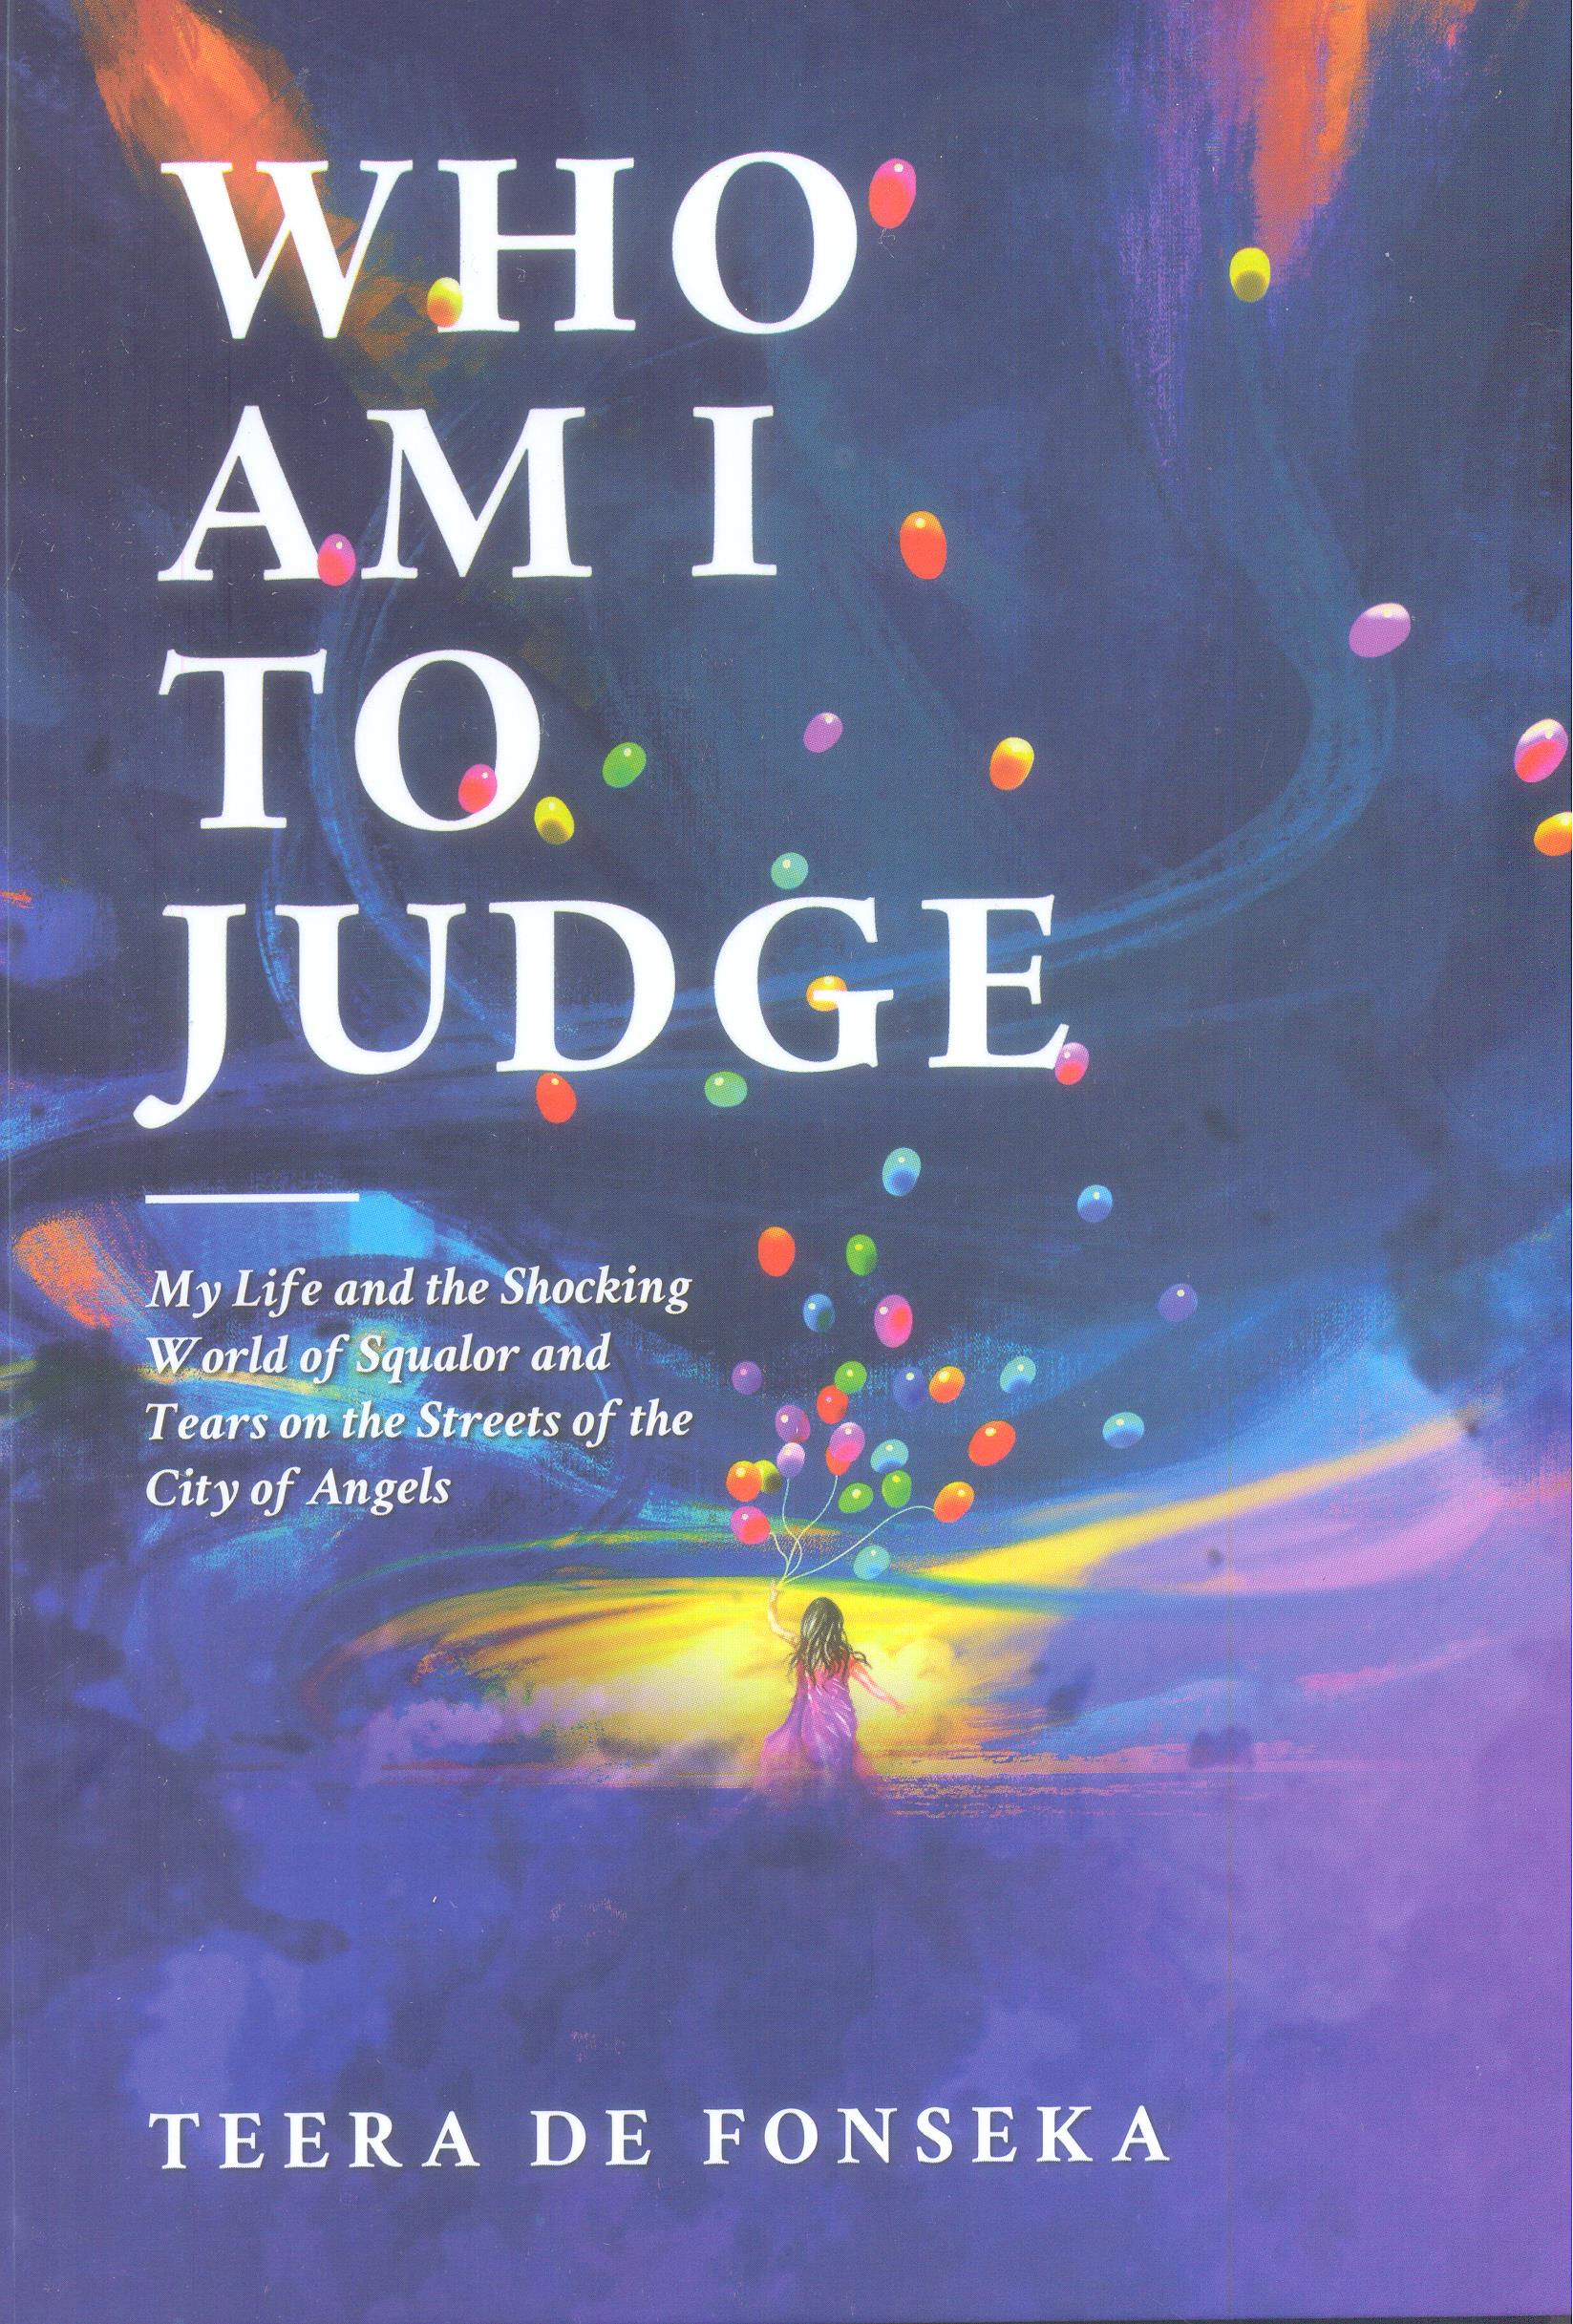 WHO AM I TO JUDGE : My Life And The Shocking World Of Squalor And Tears On The Streets Of The City